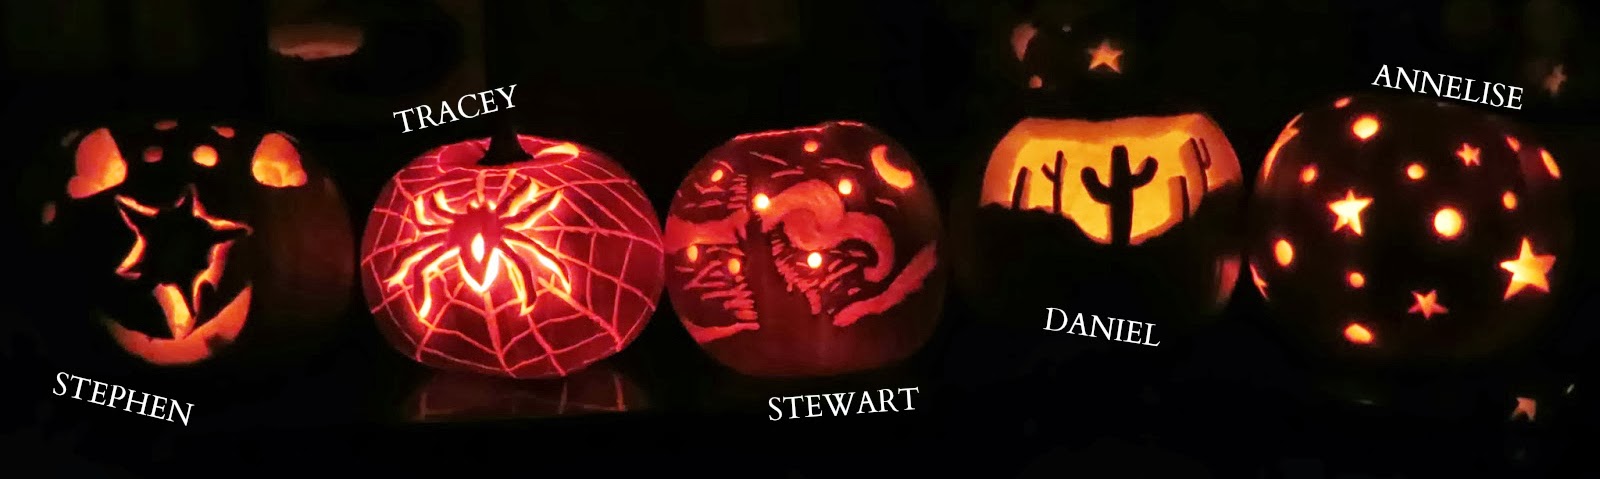 Family Pumpkin Carving Contest